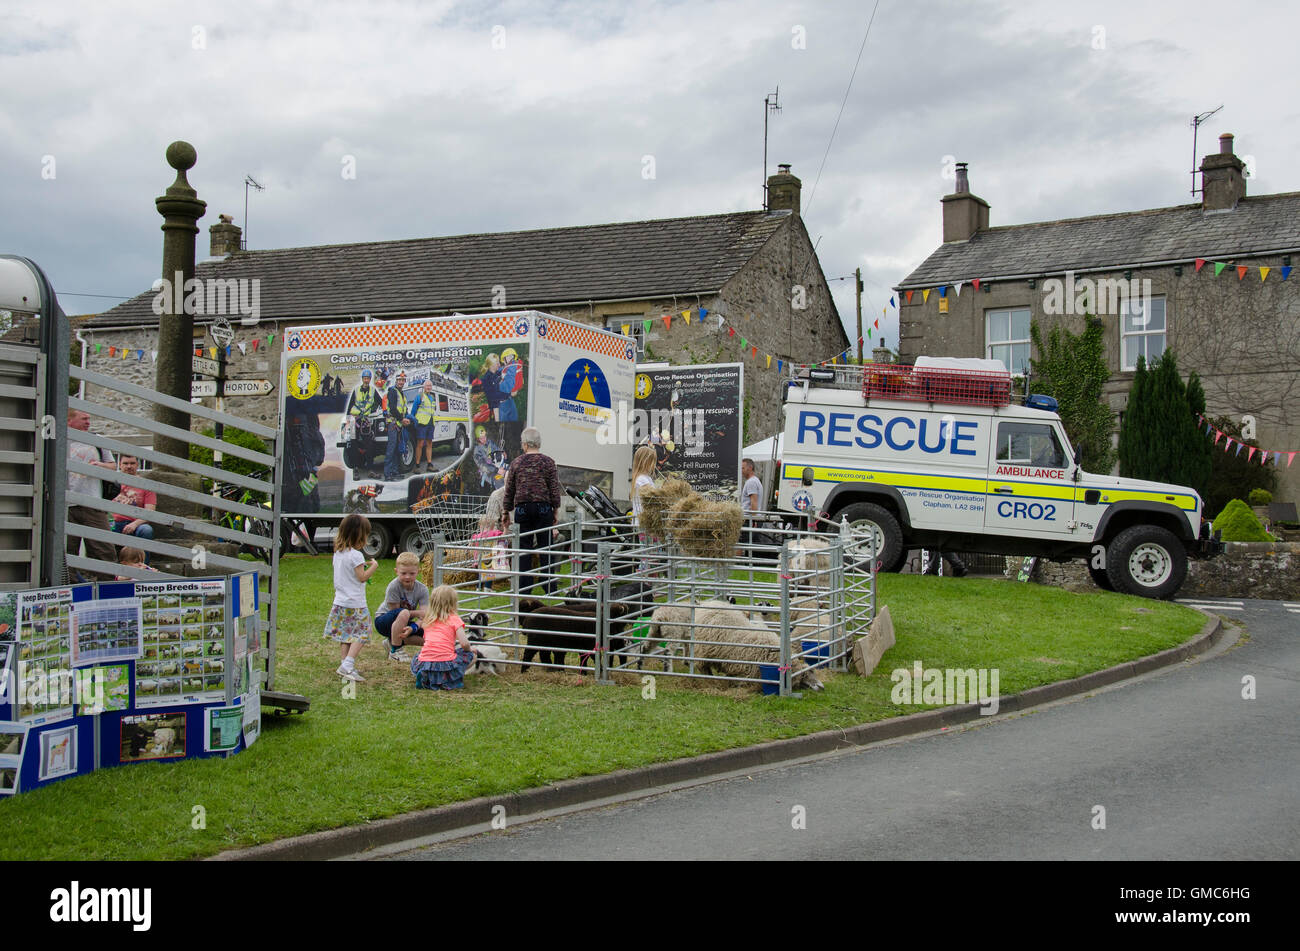 Sheep pens and displays on Austwick village green at the time of the Cuckoo Festival & Street Market - Yorkshire Dales, England. Stock Photo